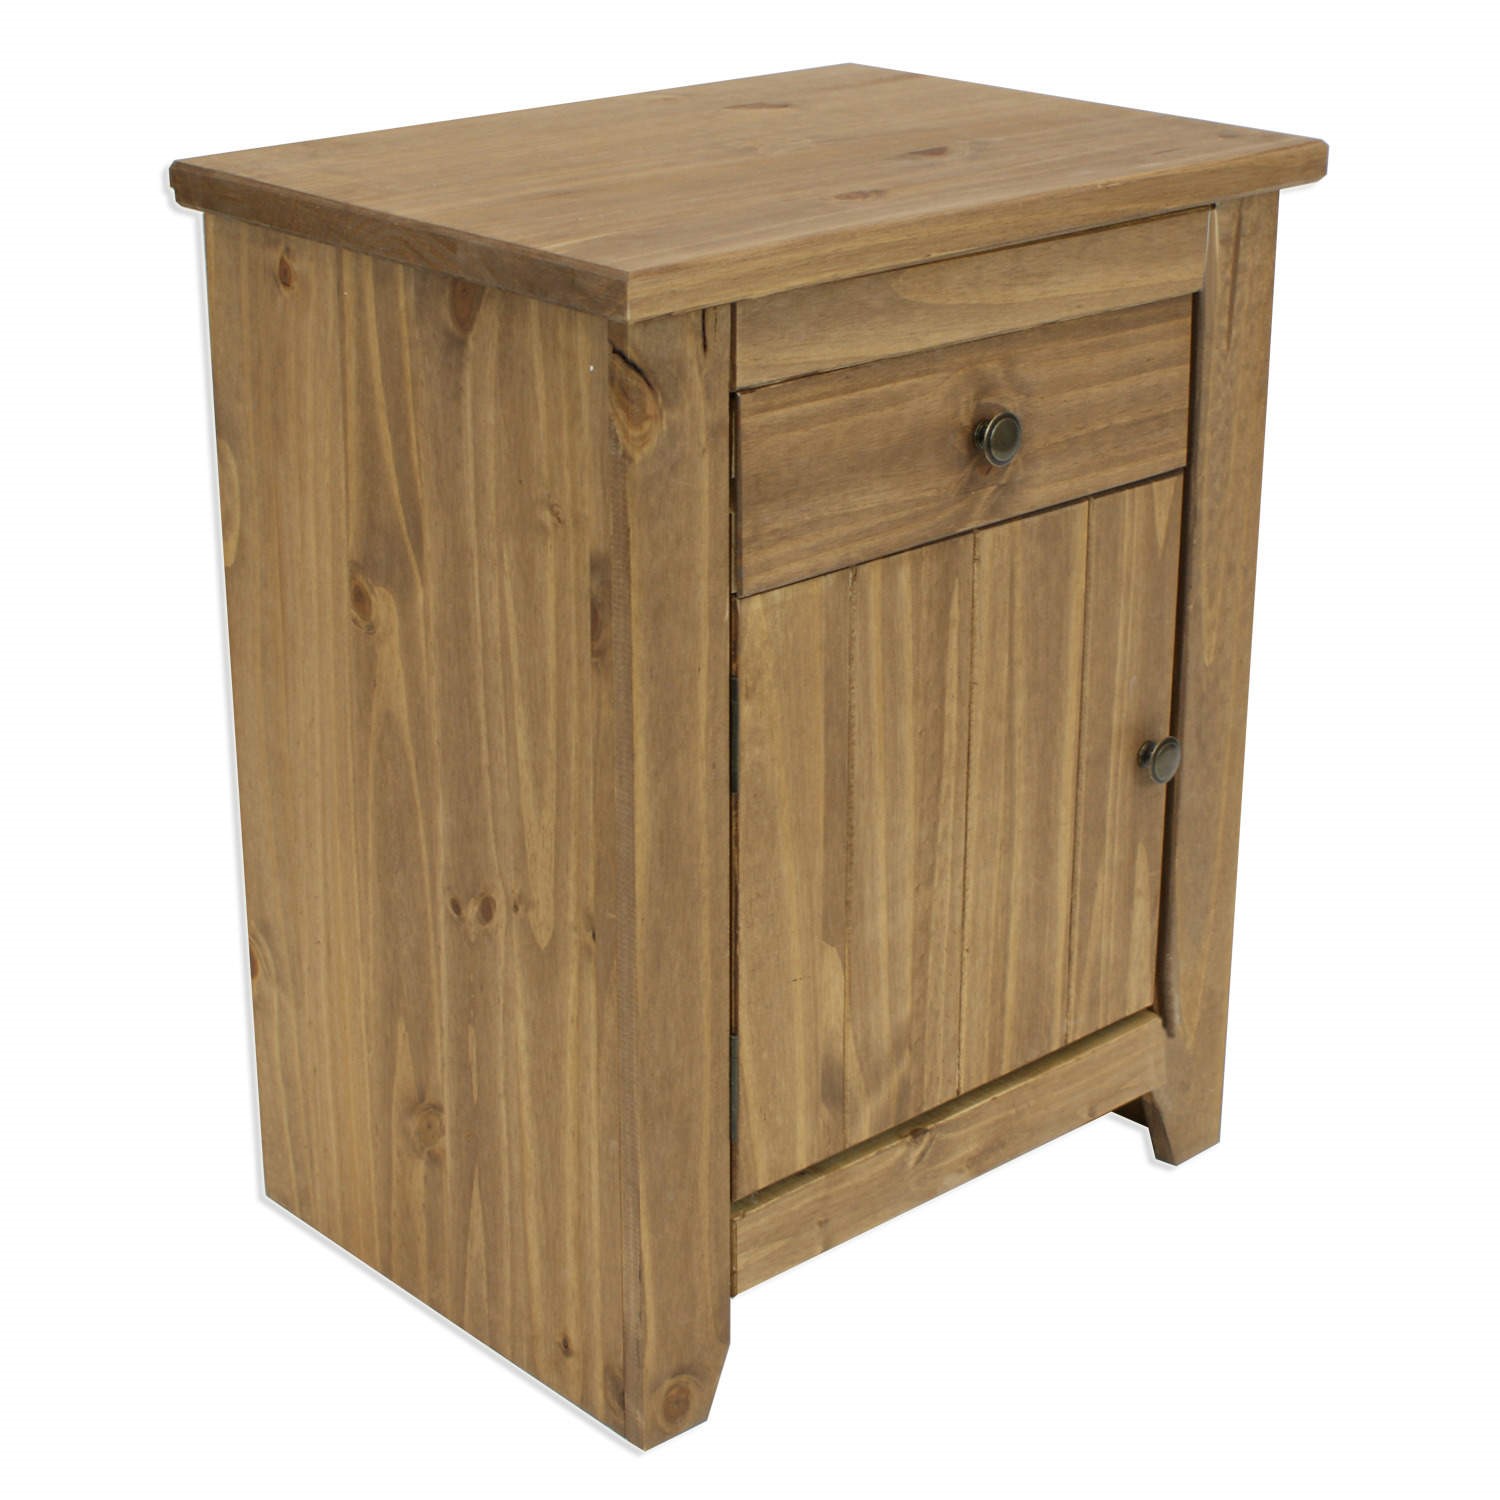 Photo of Solid pine bedside table with drawer and cupboard - havana - lpd